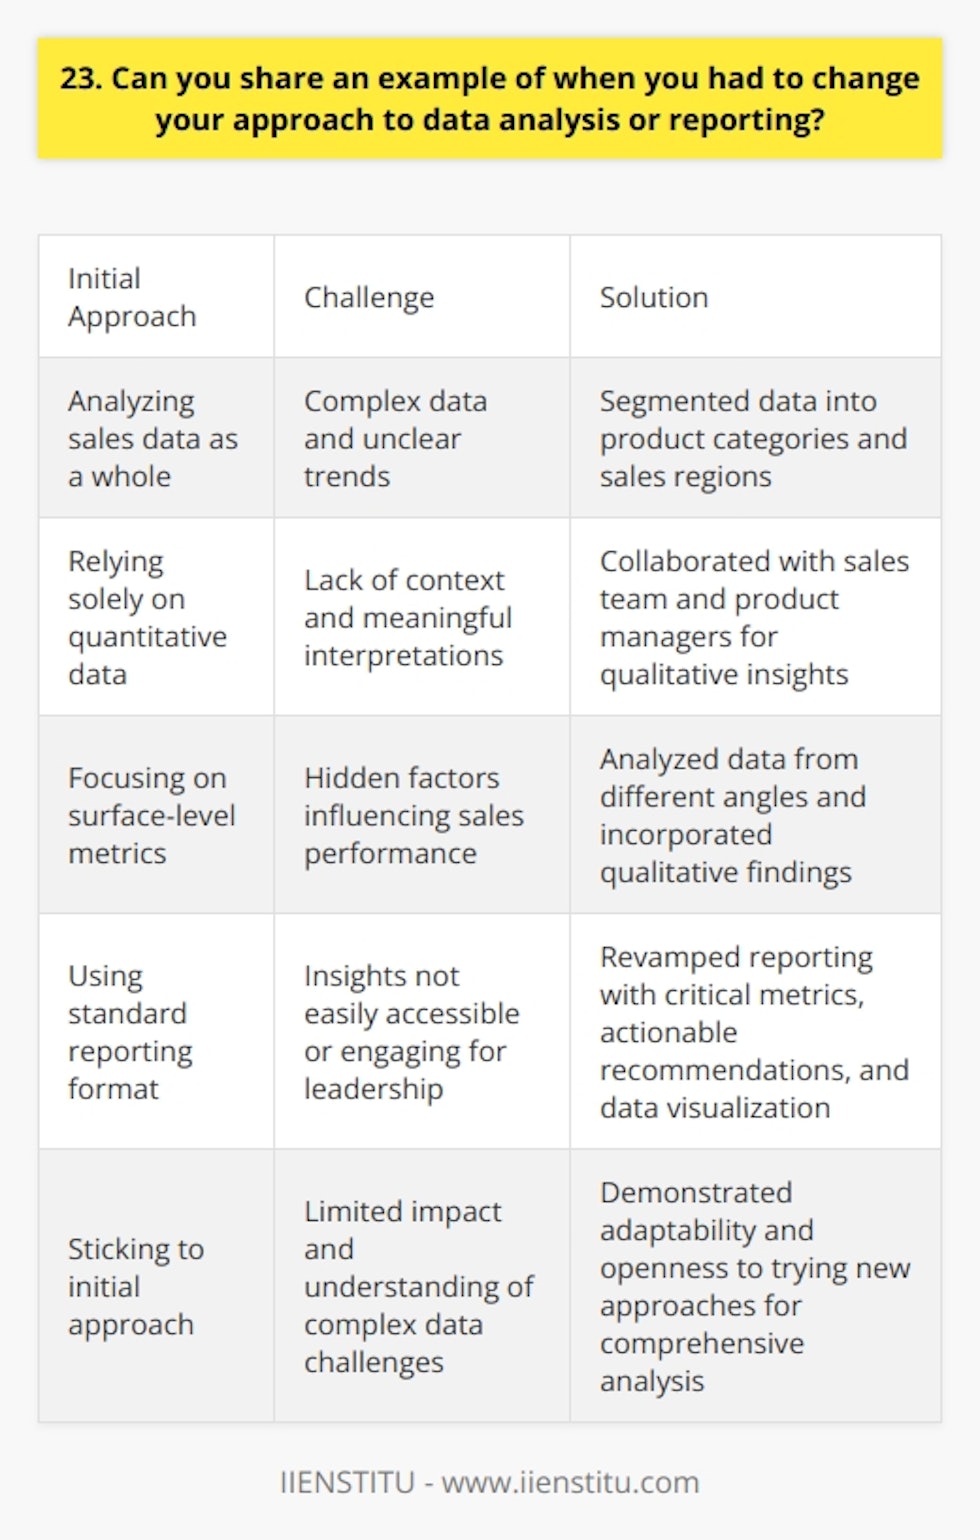 In my previous role as a data analyst, I encountered a situation where my initial approach to analyzing sales data wasnt yielding actionable insights. The data was complex and the trends were unclear. Adapting the Analysis Approach I realized I needed to change my strategy. I decided to break down the data into smaller segments based on product categories and sales regions. This allowed me to identify specific patterns and anomalies that were previously hidden in the aggregated data. Collaborating with Stakeholders I also reached out to the sales team and product managers to gather their insights and expertise. Their input helped me understand the context behind the numbers and make more meaningful interpretations. A Fresh Perspective By looking at the data from different angles and incorporating qualitative insights, I was able to uncover key factors influencing sales performance. For example, I discovered that a particular product line was underperforming due to outdated features compared to competitors. Revamping the Reporting Format Based on these findings, I also revamped the reporting format to highlight the most critical metrics and provide actionable recommendations. I used data visualization techniques to make the insights more accessible and engaging for the leadership team. In the end, my adaptability and willingness to try new approaches allowed me to deliver a more comprehensive and impactful analysis. It was a valuable lesson in being flexible and open-minded when tackling complex data challenges.